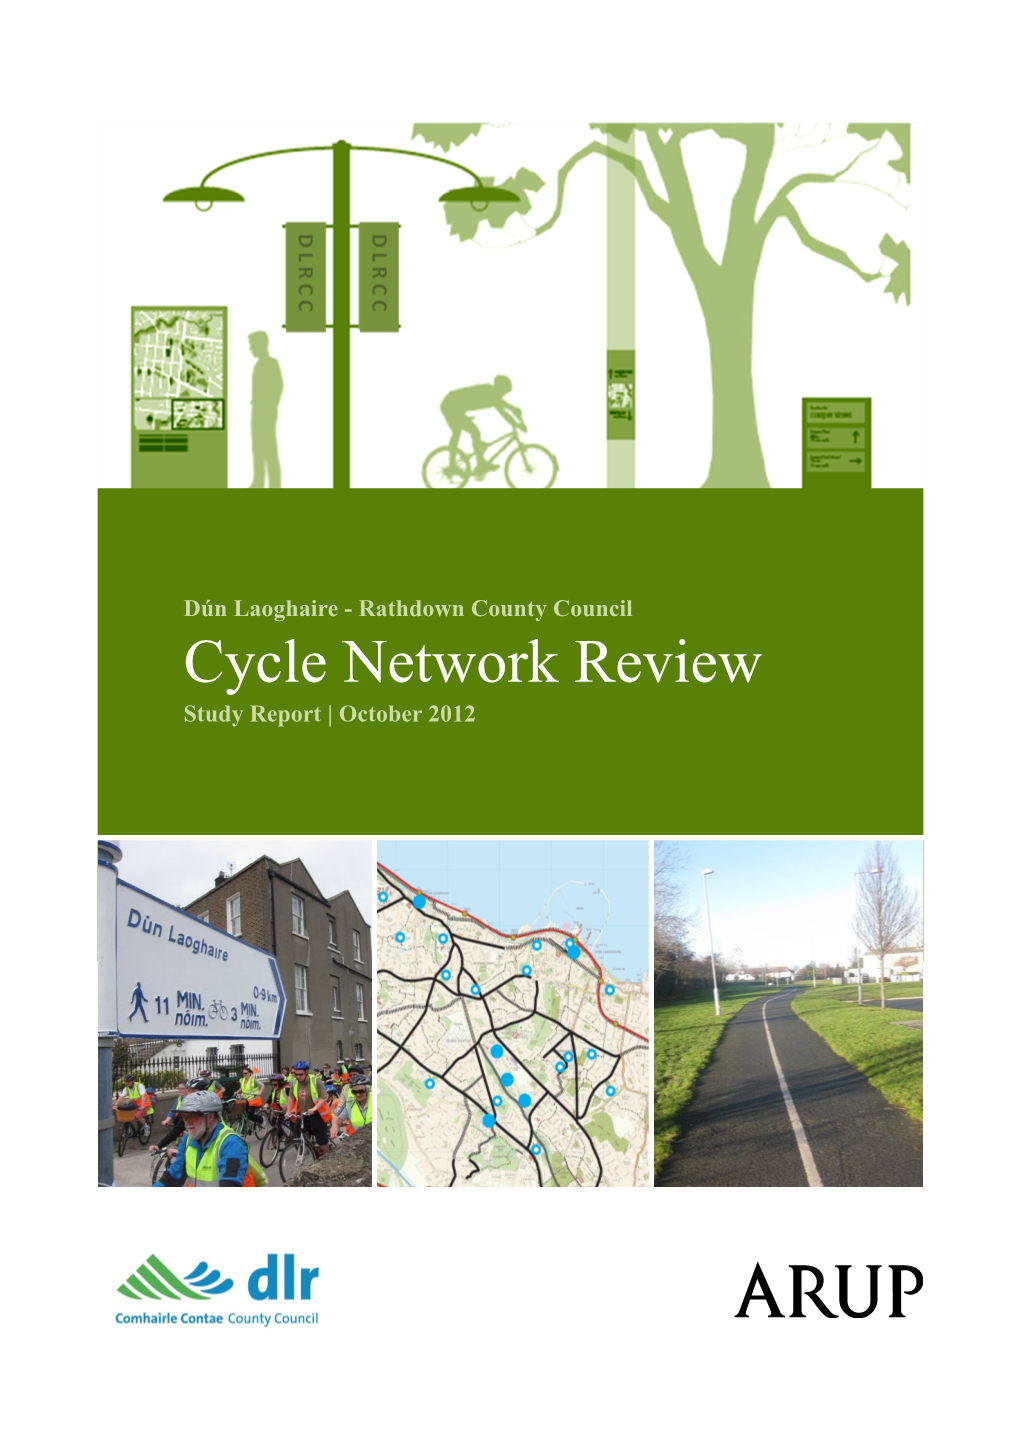 Cycle Network Review Study Report | October 2012